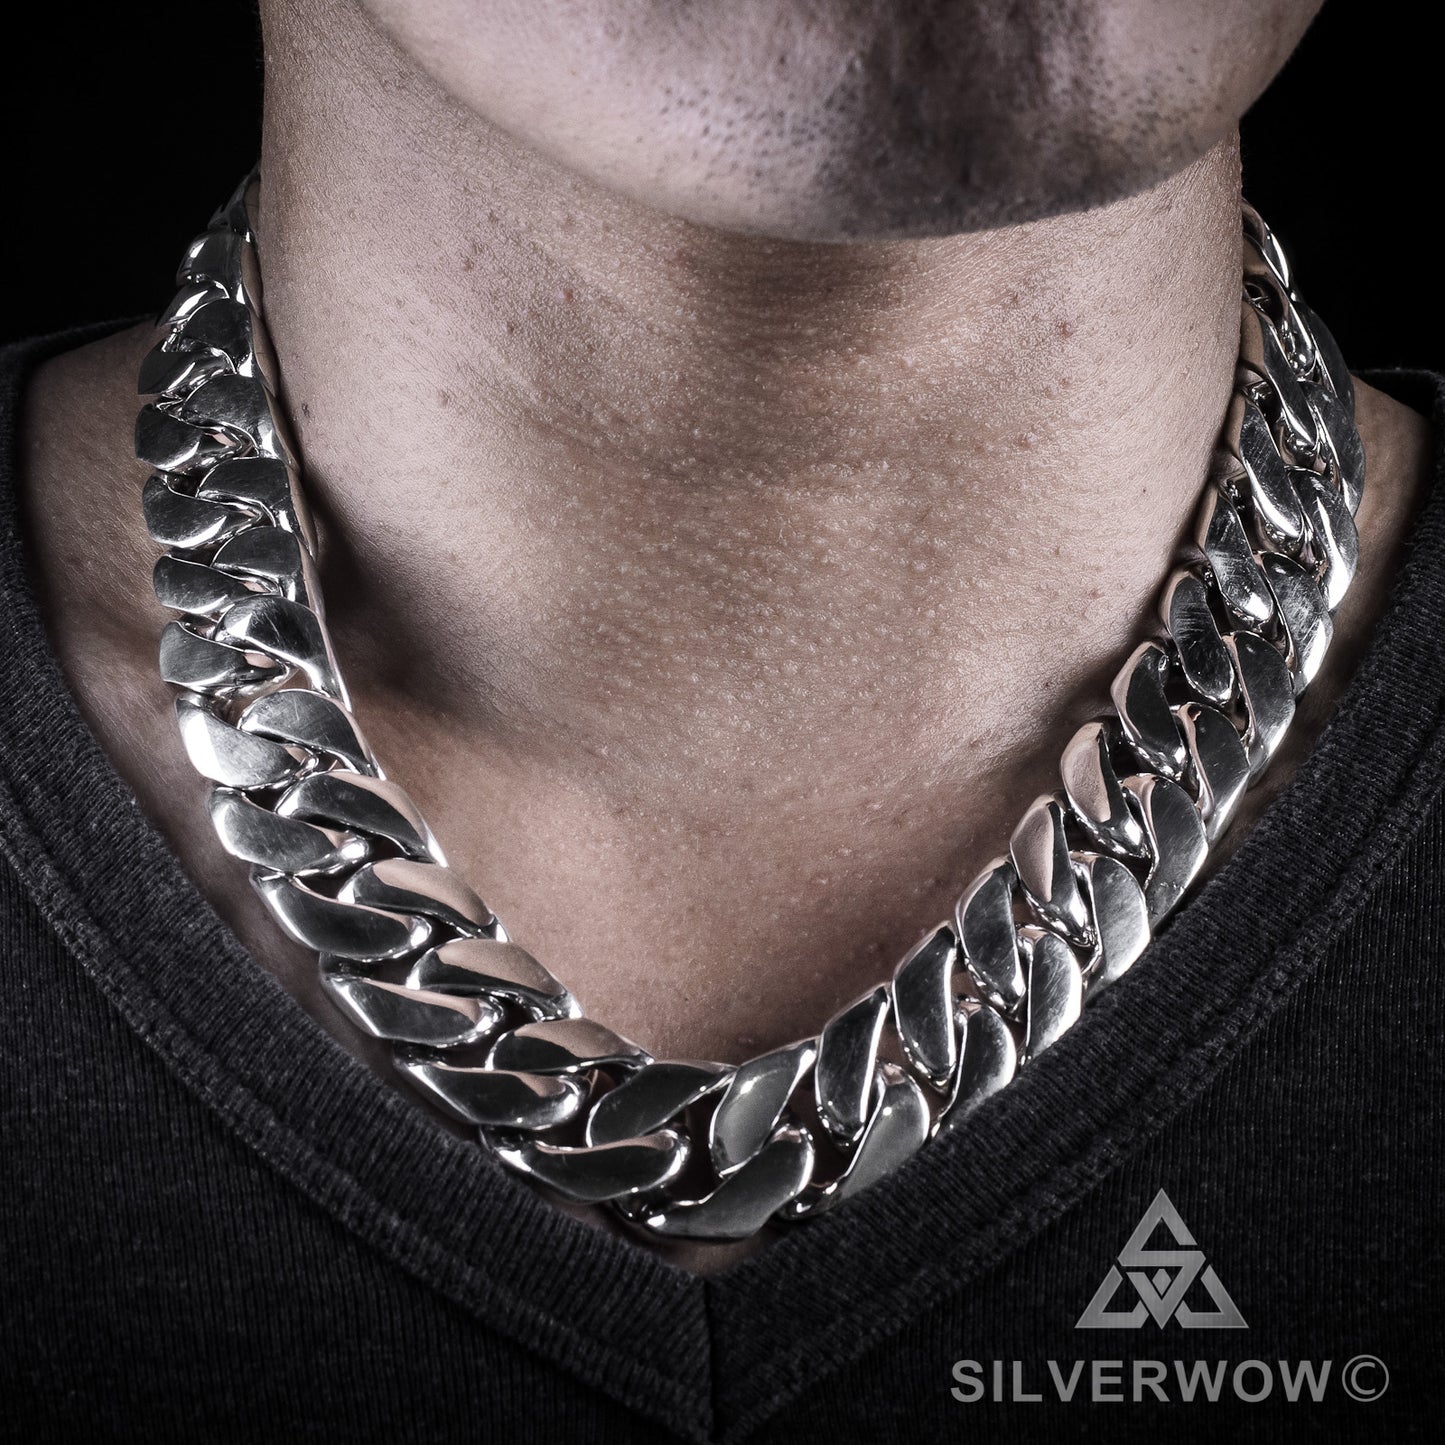 20mm Heavy Curb Silver Necklace Chain